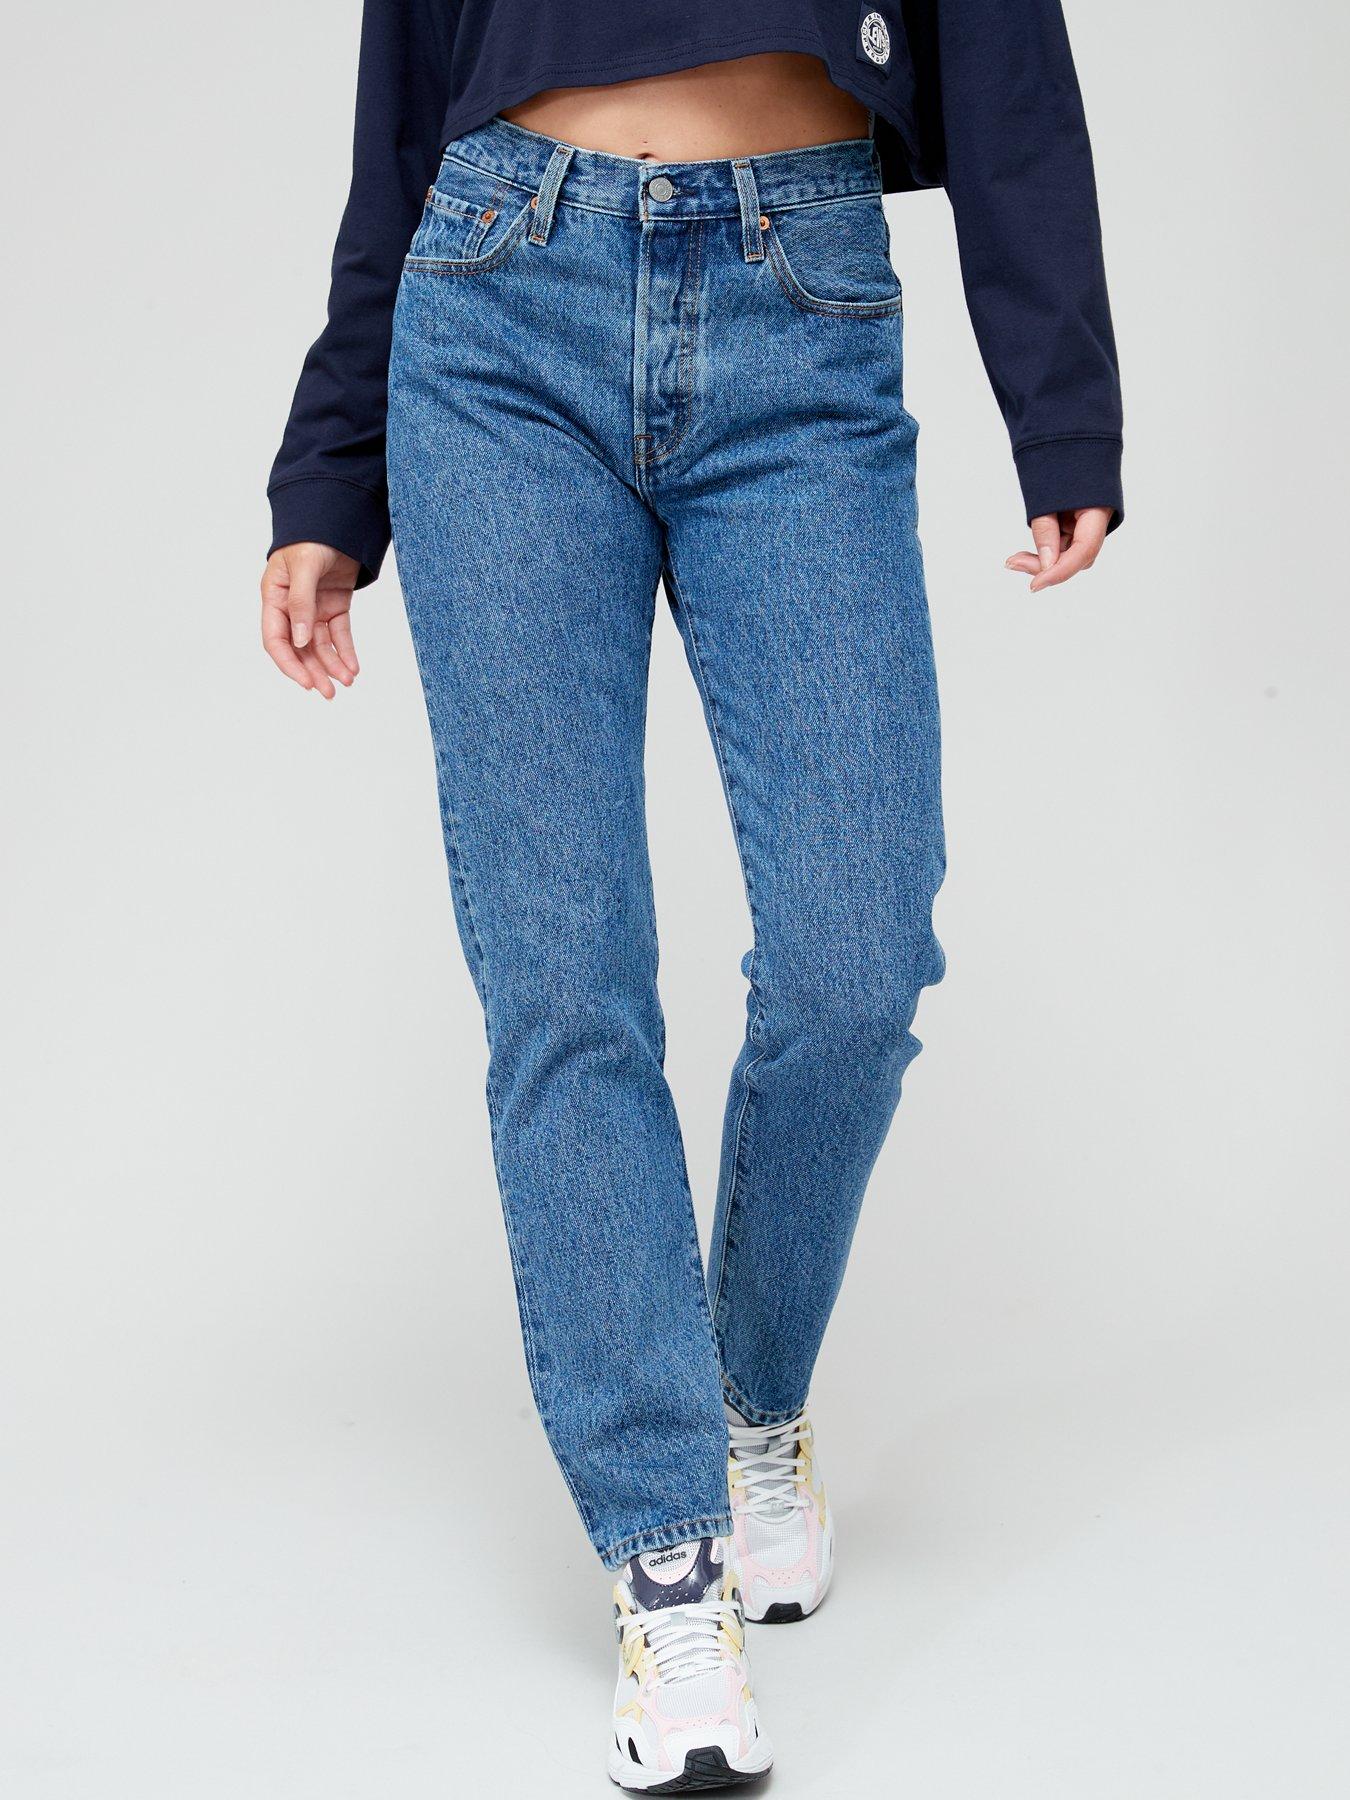 Levi's 501® Jeans For Women - Shout Out Stone 